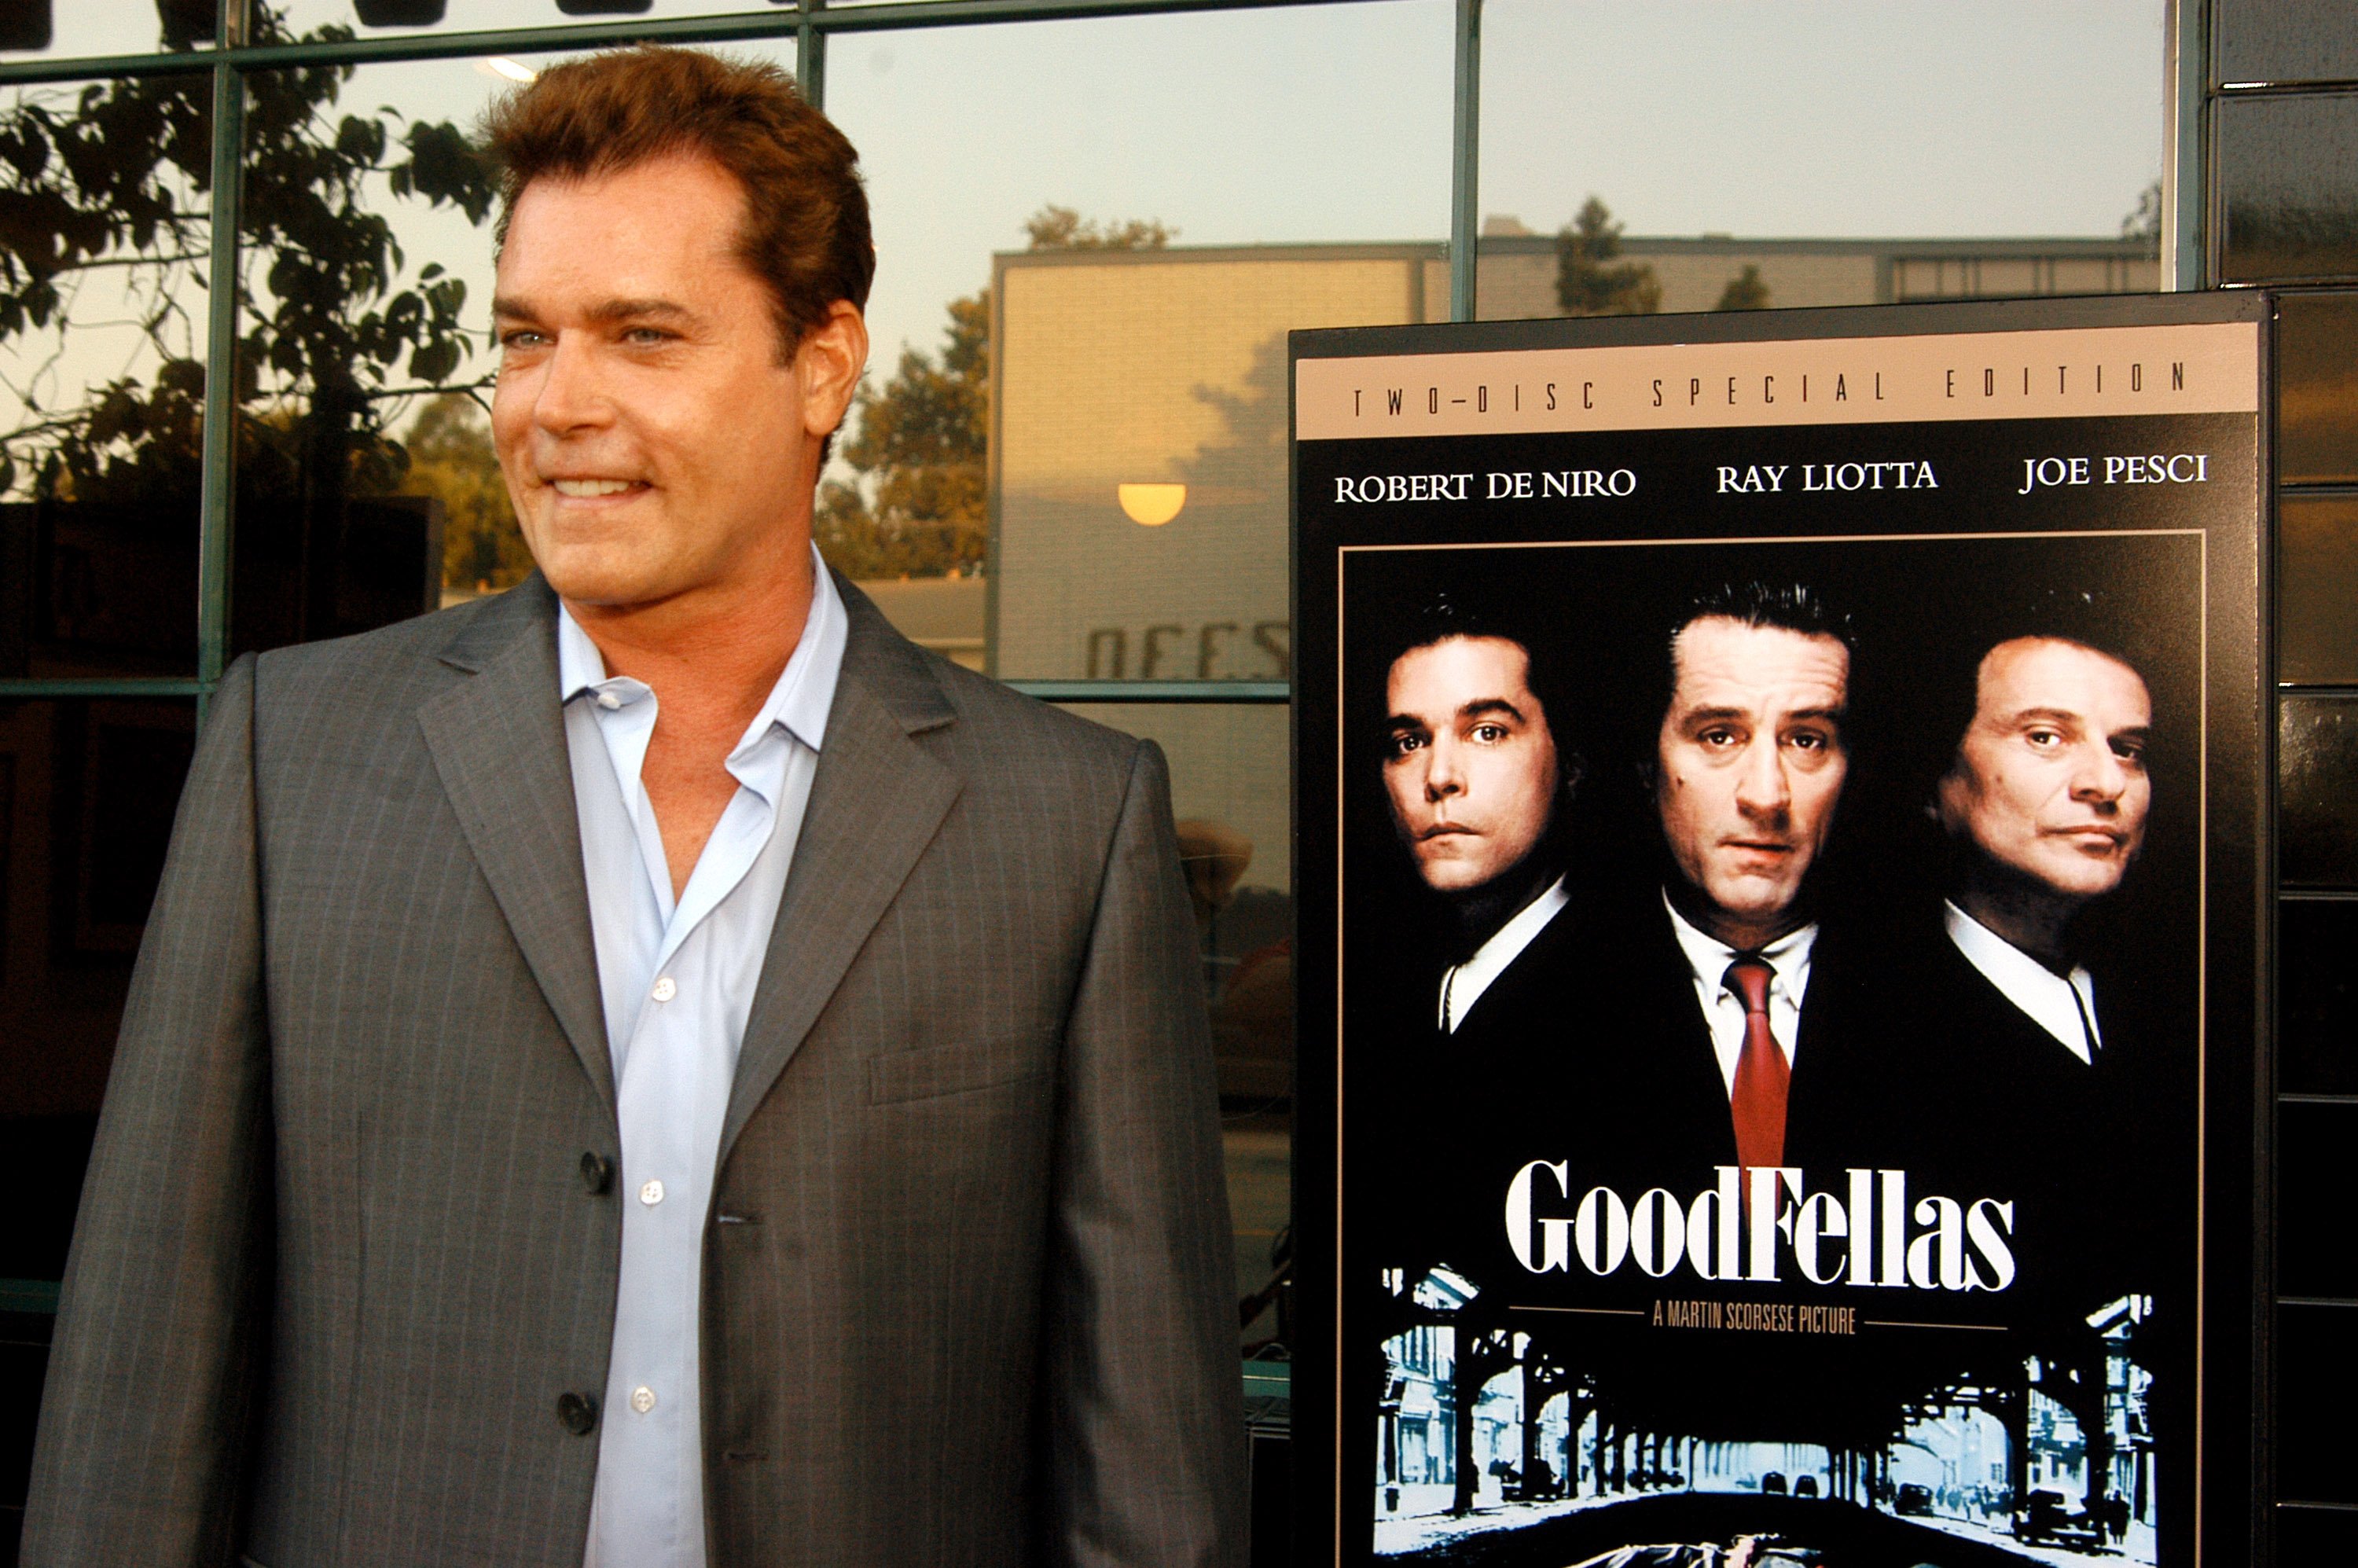 Ray Liotta during 'GoodFellas' Special Edition DVD Release